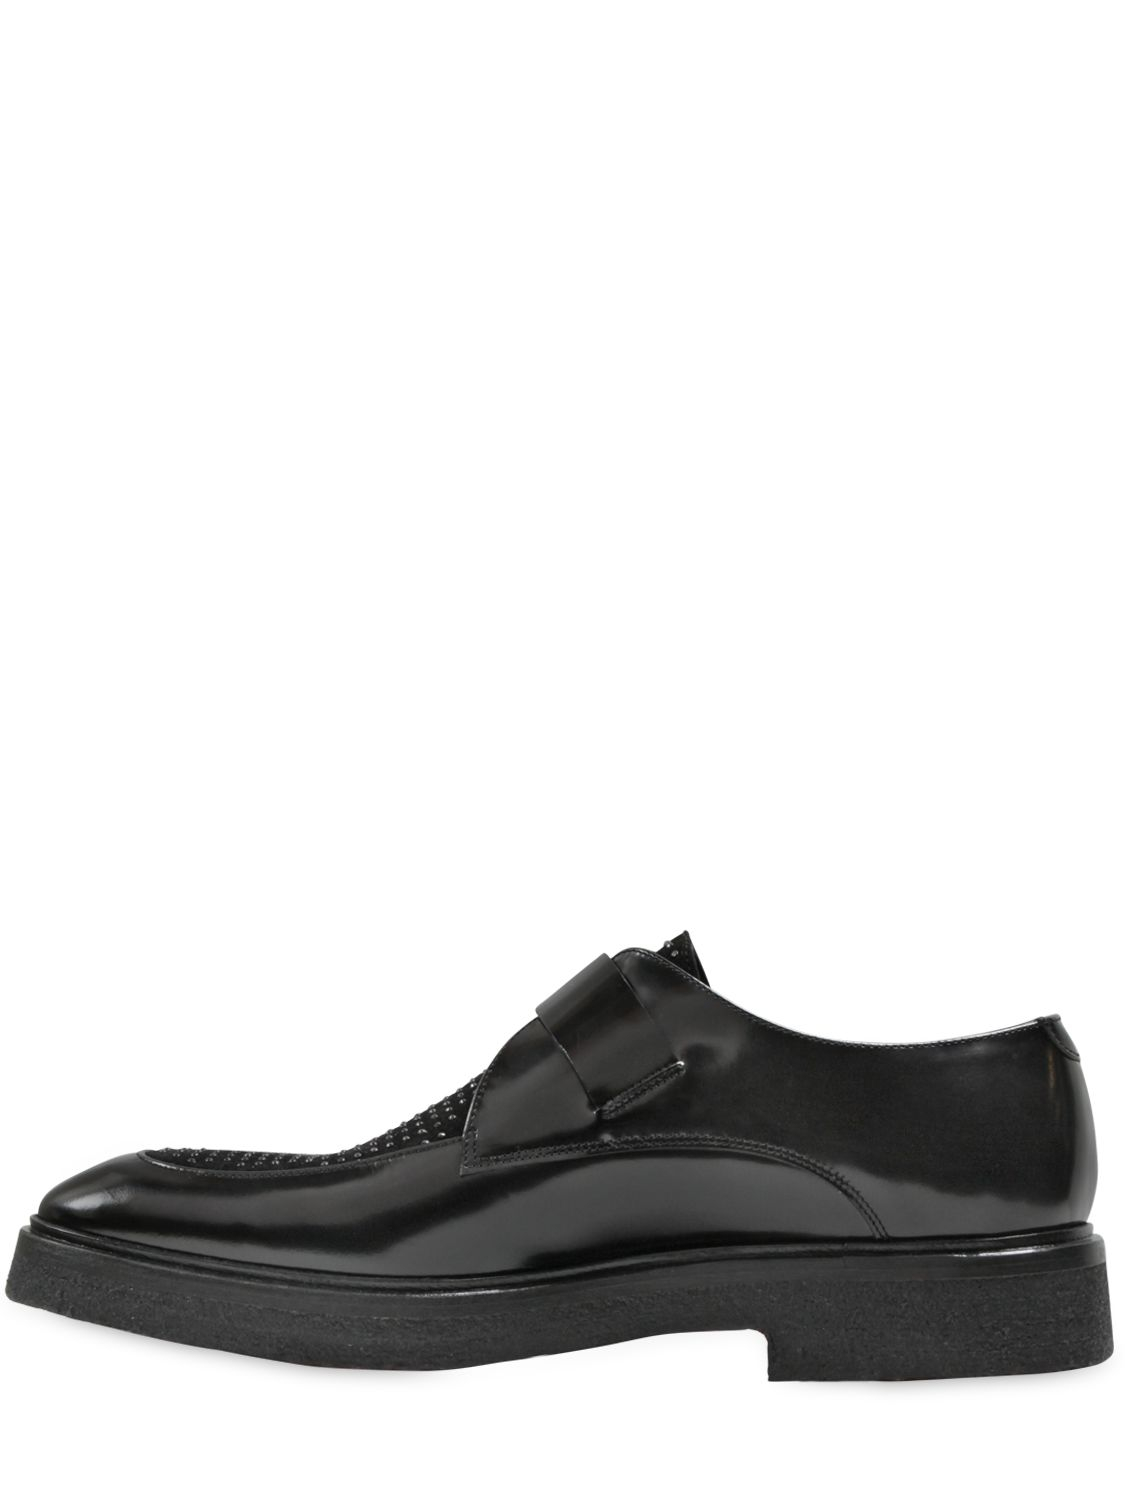 John richmond Studded Leather Monk Strap Shoes in Black ...